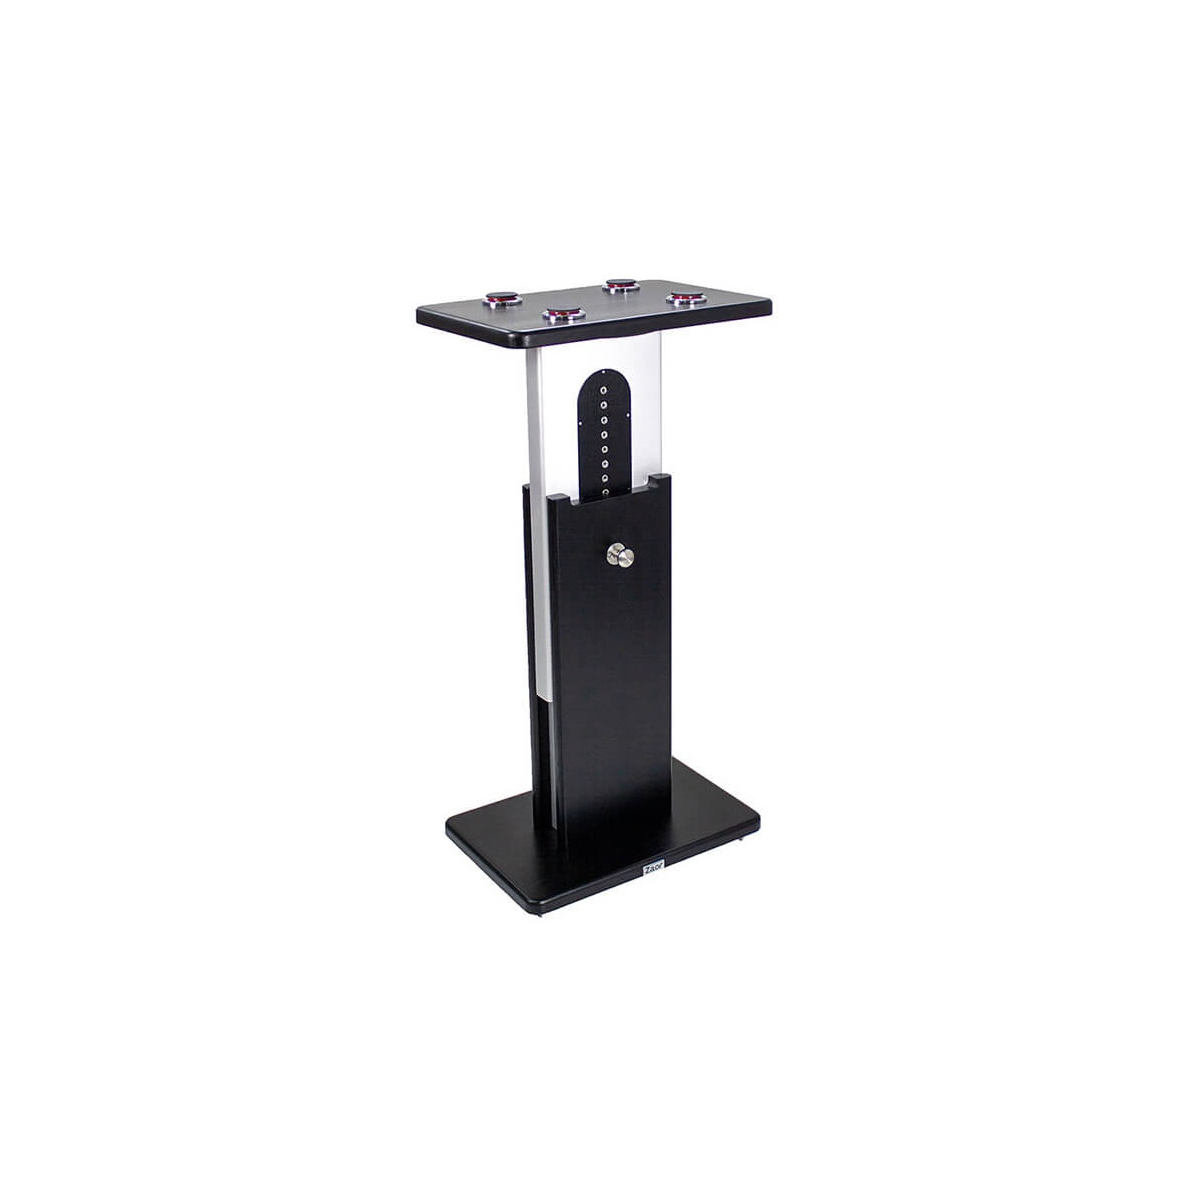 Pieds enceintes monitoring - Zaor - ISO STAND MKIII 600 (NOIR)